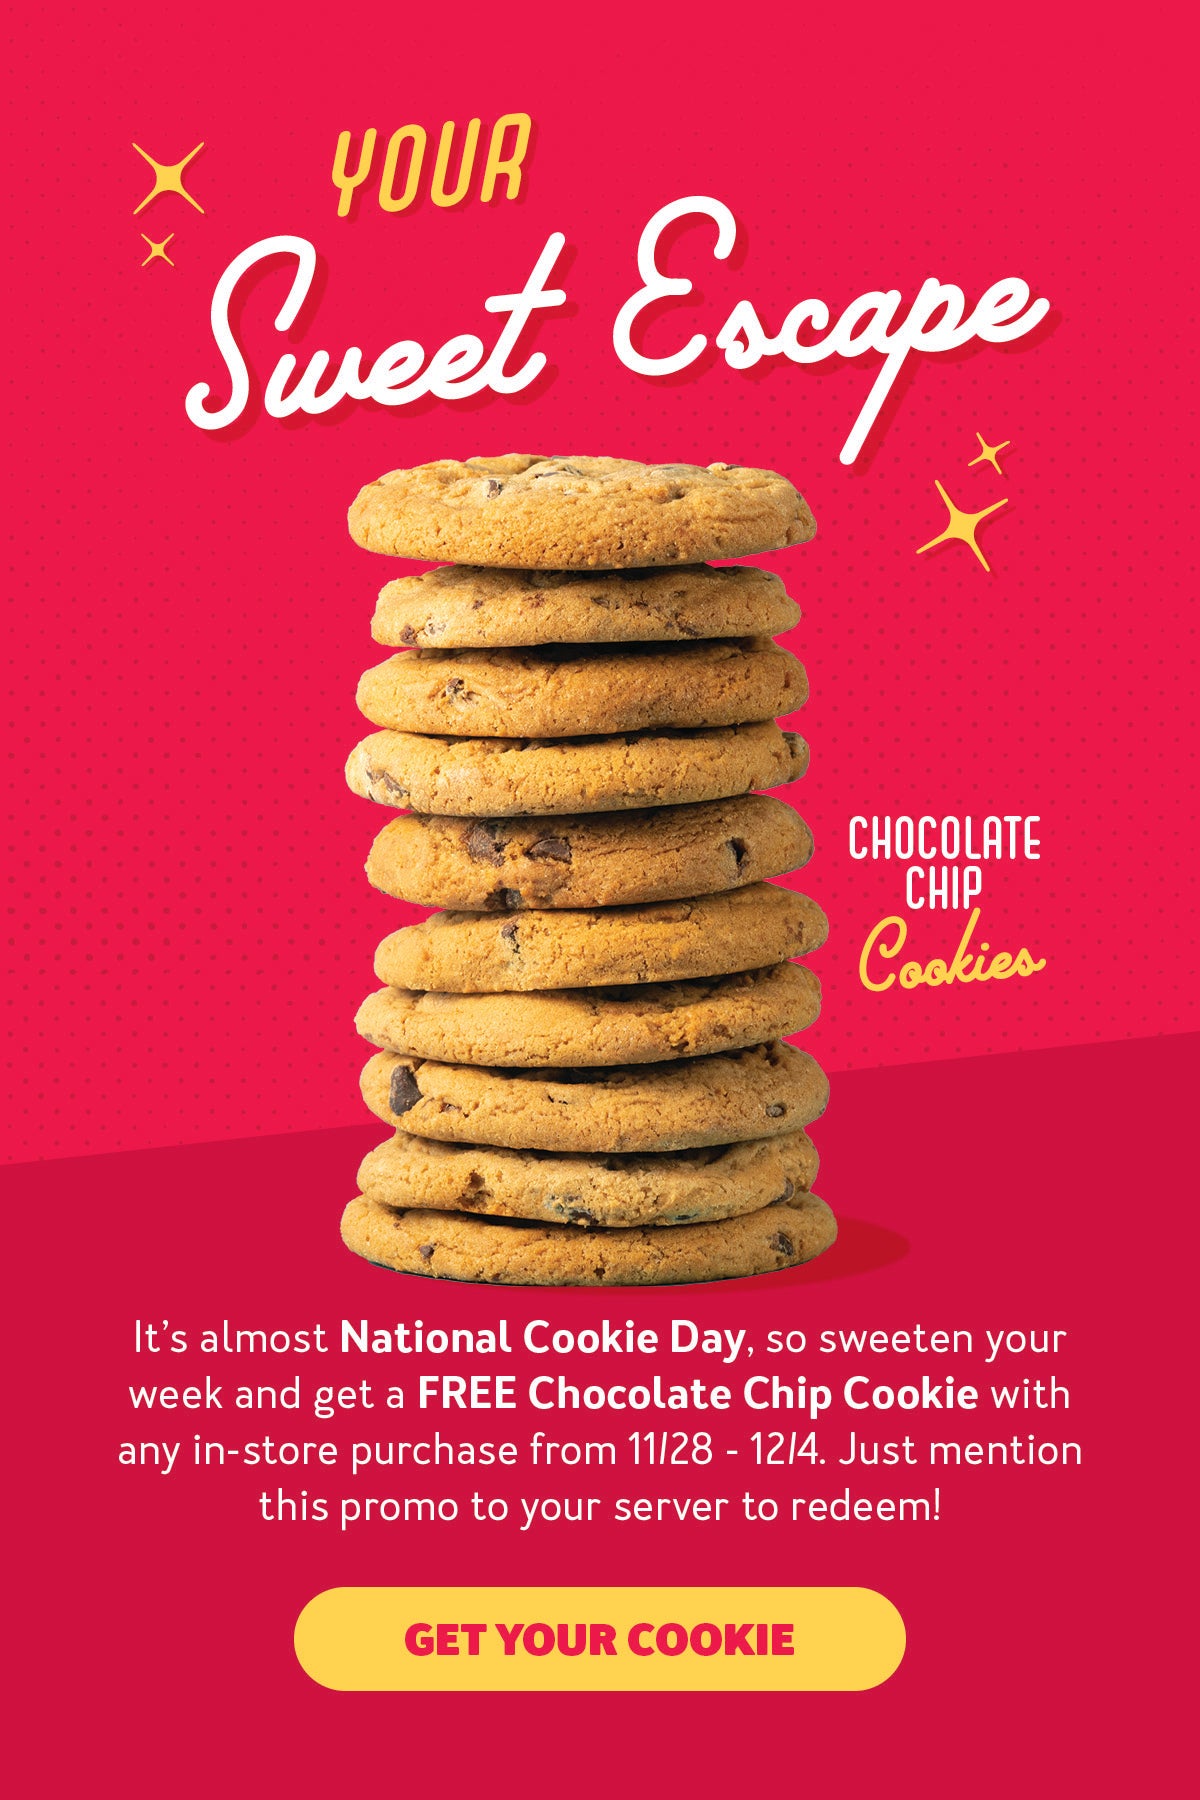 Get a Free Cookie with any in-store purchase from 11/28 - 12/4!